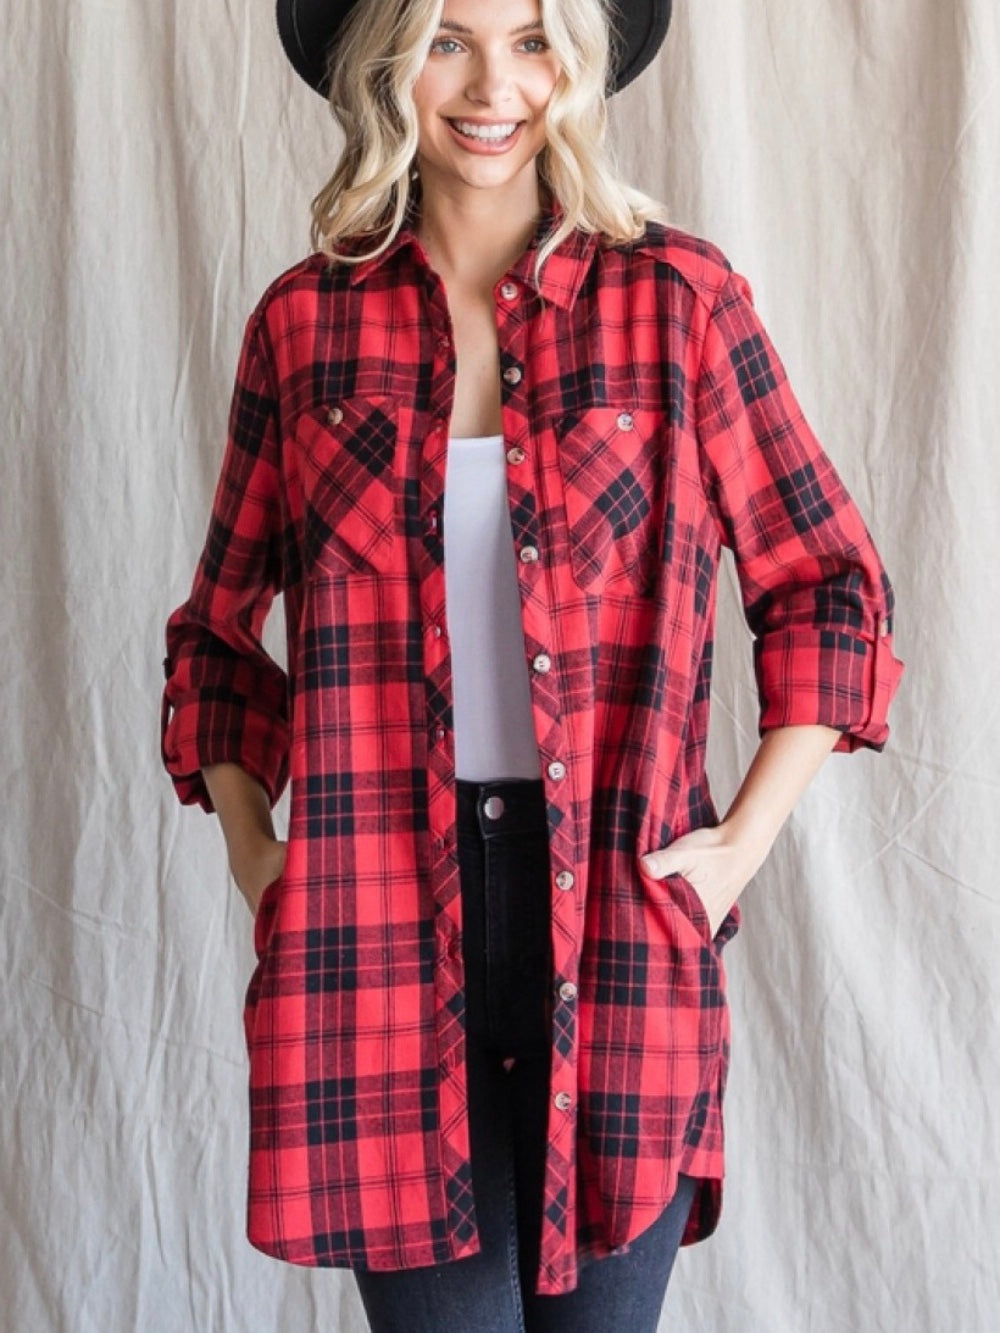 Leia Plaid Flannel Top - Red Mix